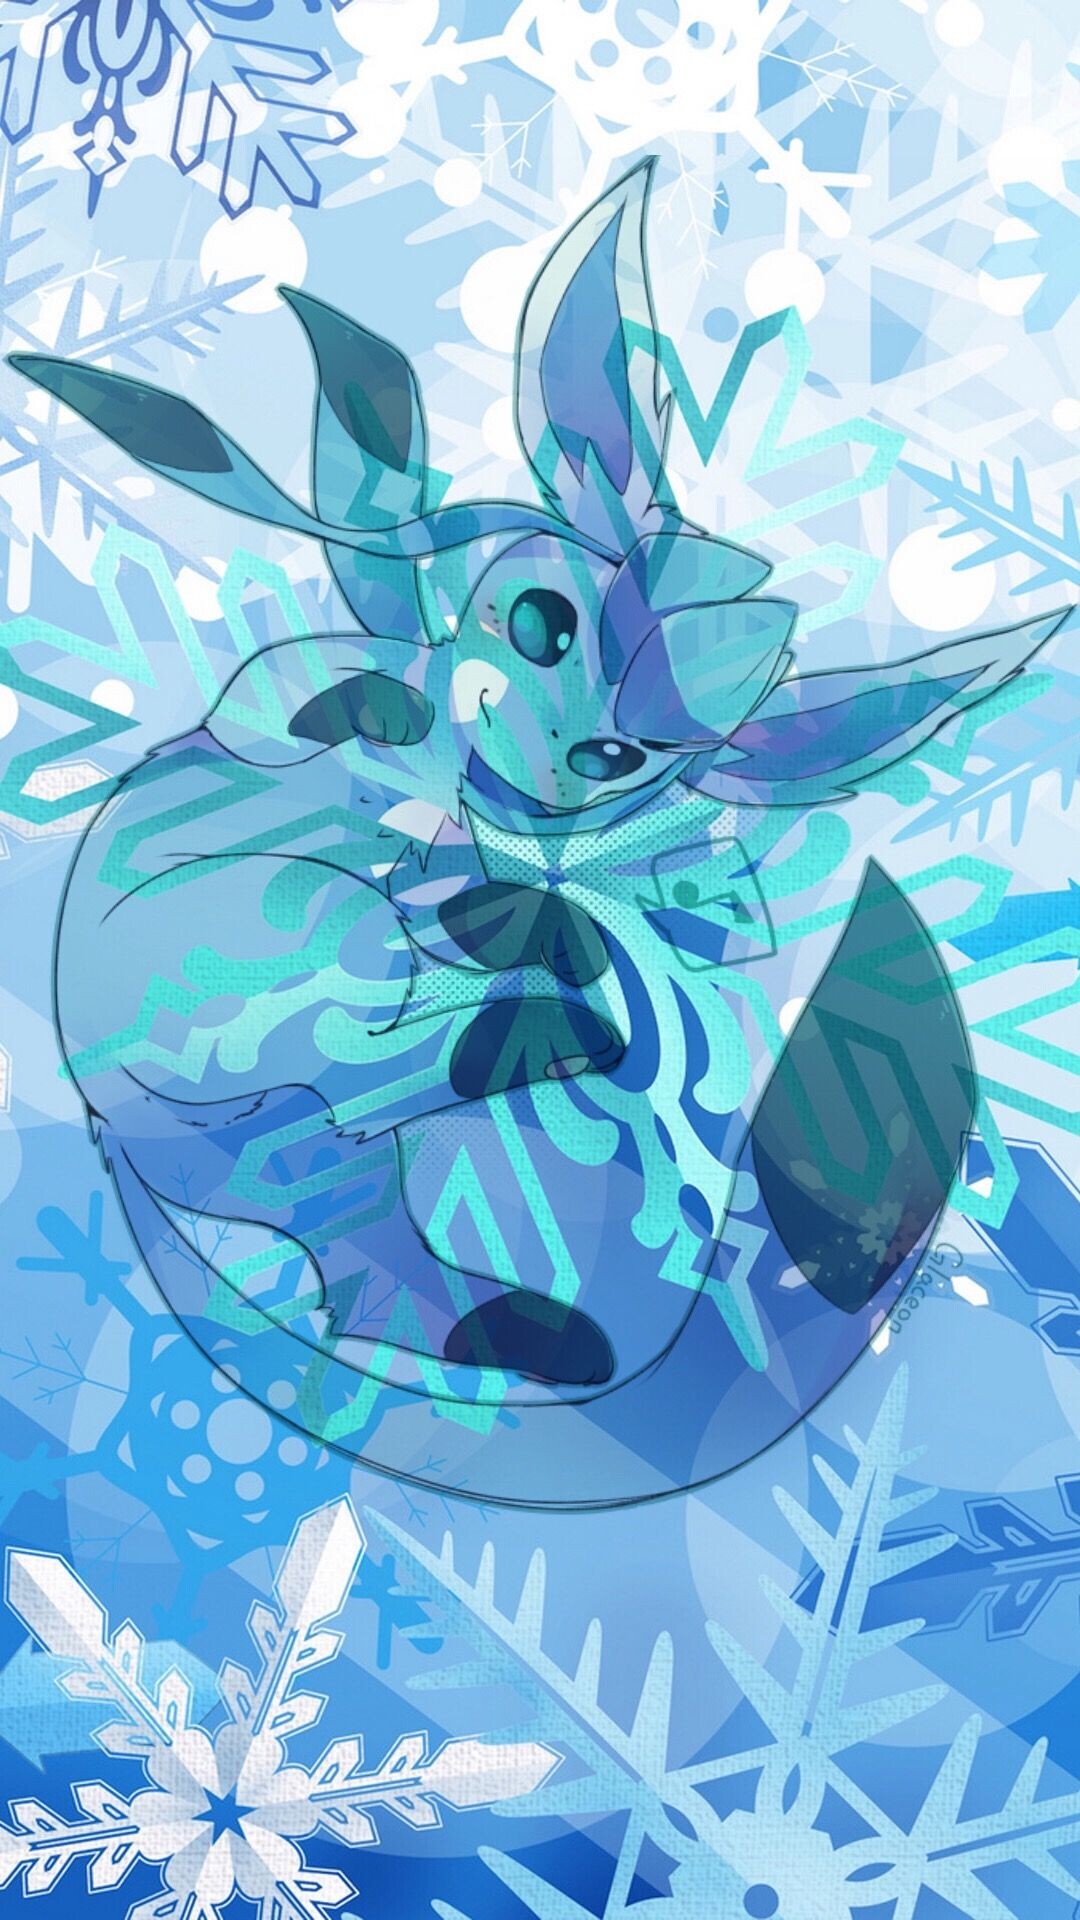 Glaceon: Creature with cerulean blue cap-like feature on its forehead, Two long blue strips dangling from either side. 1080x1920 Full HD Wallpaper.